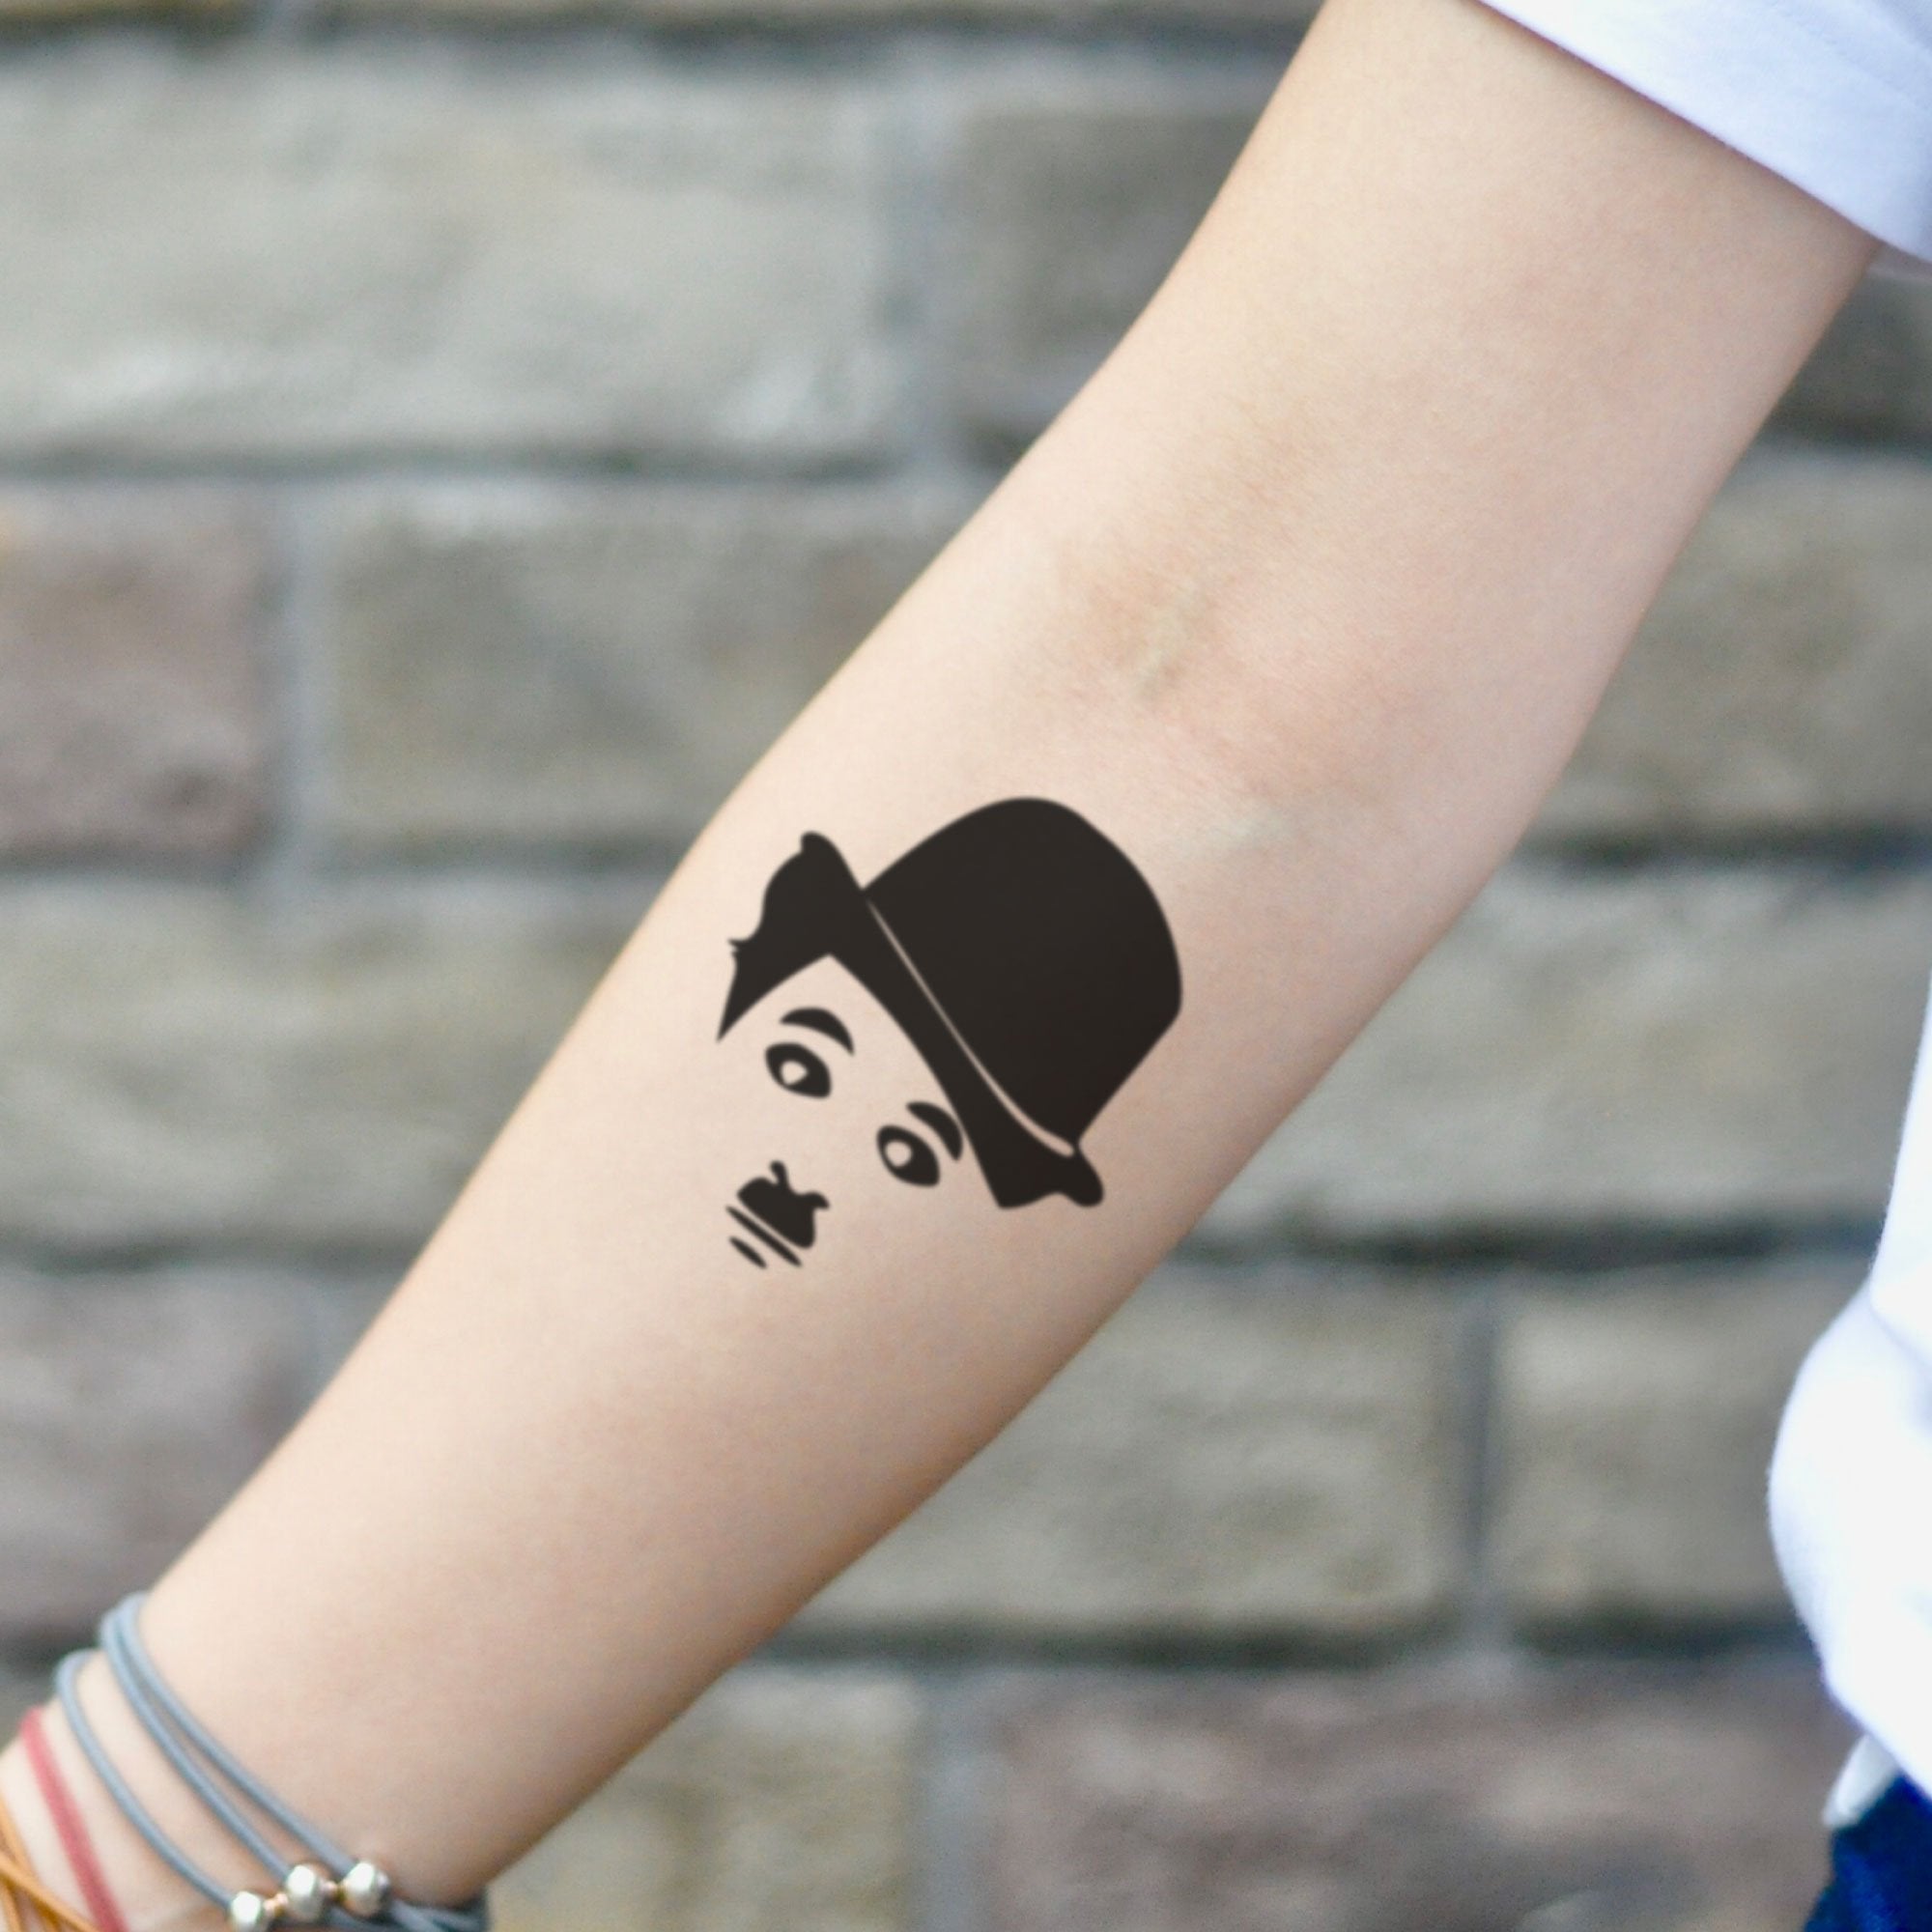 Tattoo uploaded by PK • A day without laughter is a day wasted, by Perla  #Perla #charliechaplin #moviedirector #quote #btattooing #blackwork •  Tattoodo